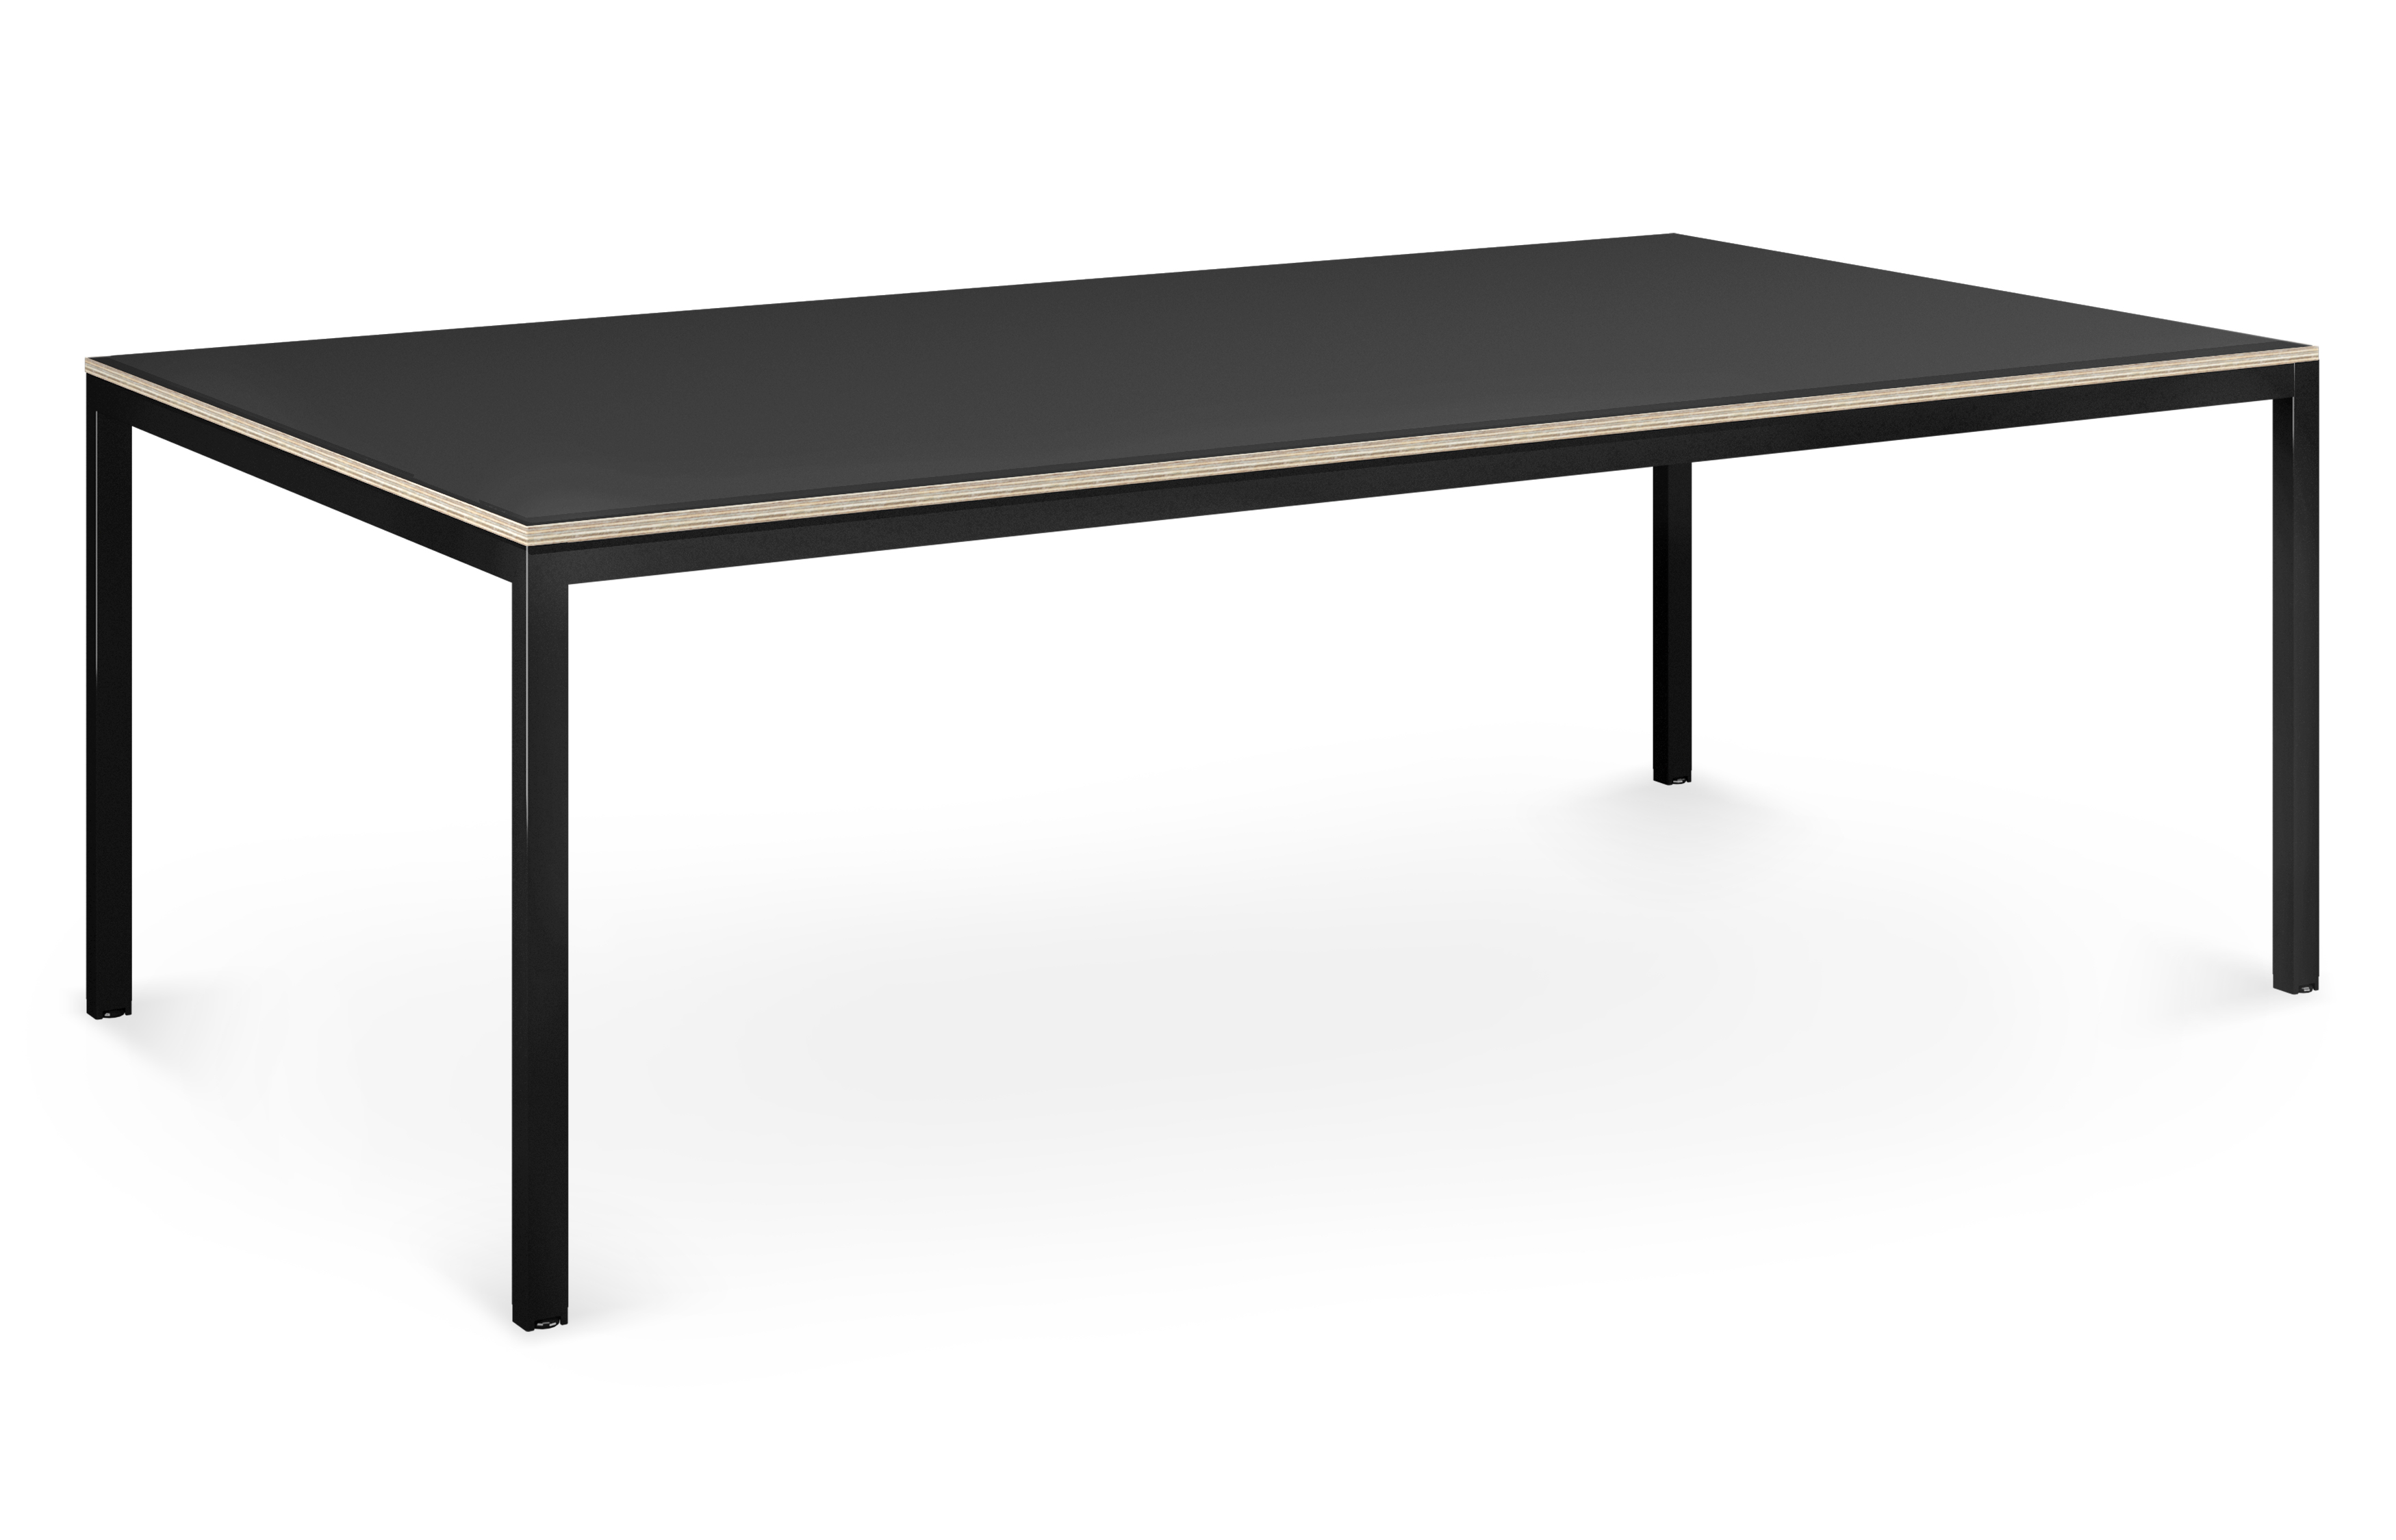 WS -Co.Stories desk - 1980 x 1380 - Black Frame, Black top with ply edge